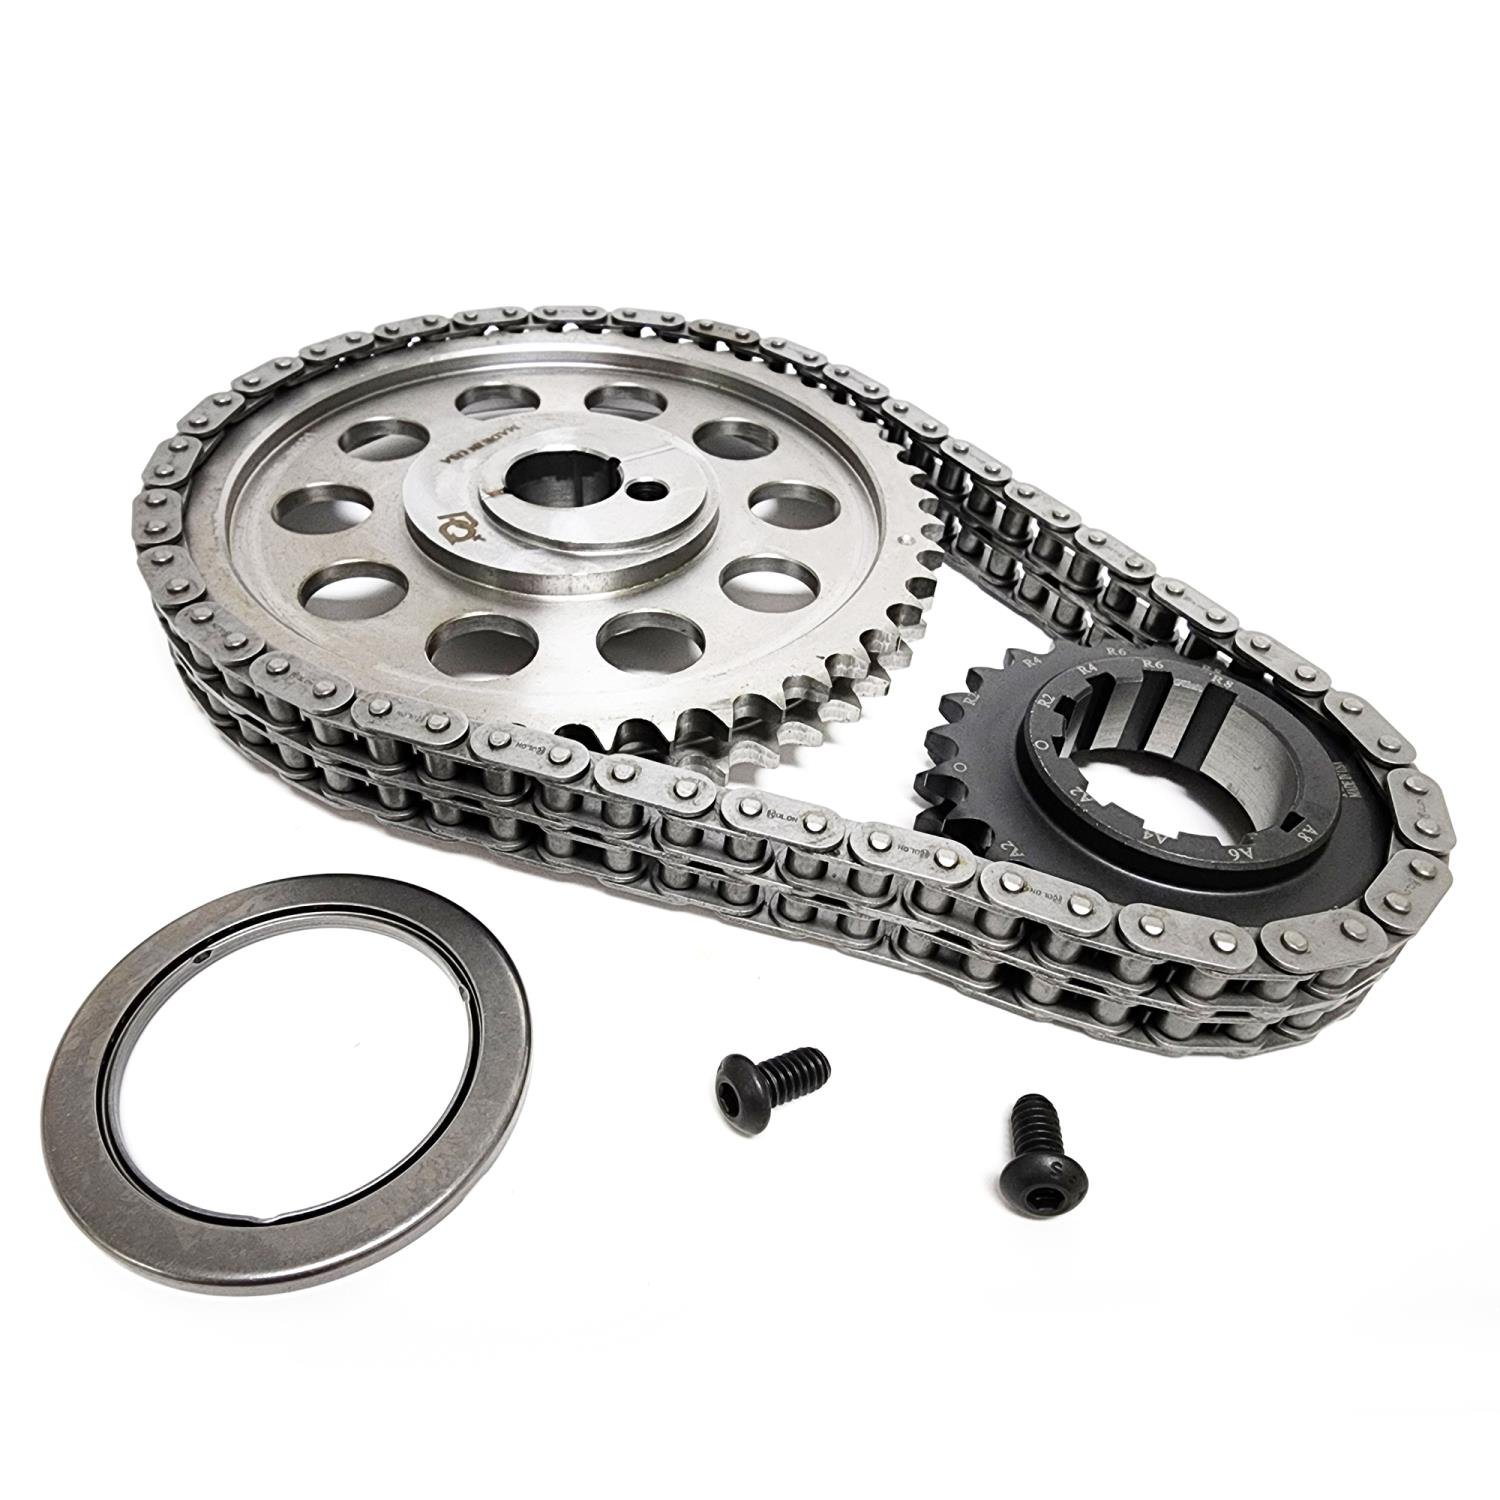 Double-Roller Timing Chain and Gear Set for Ford 351C/400M V8